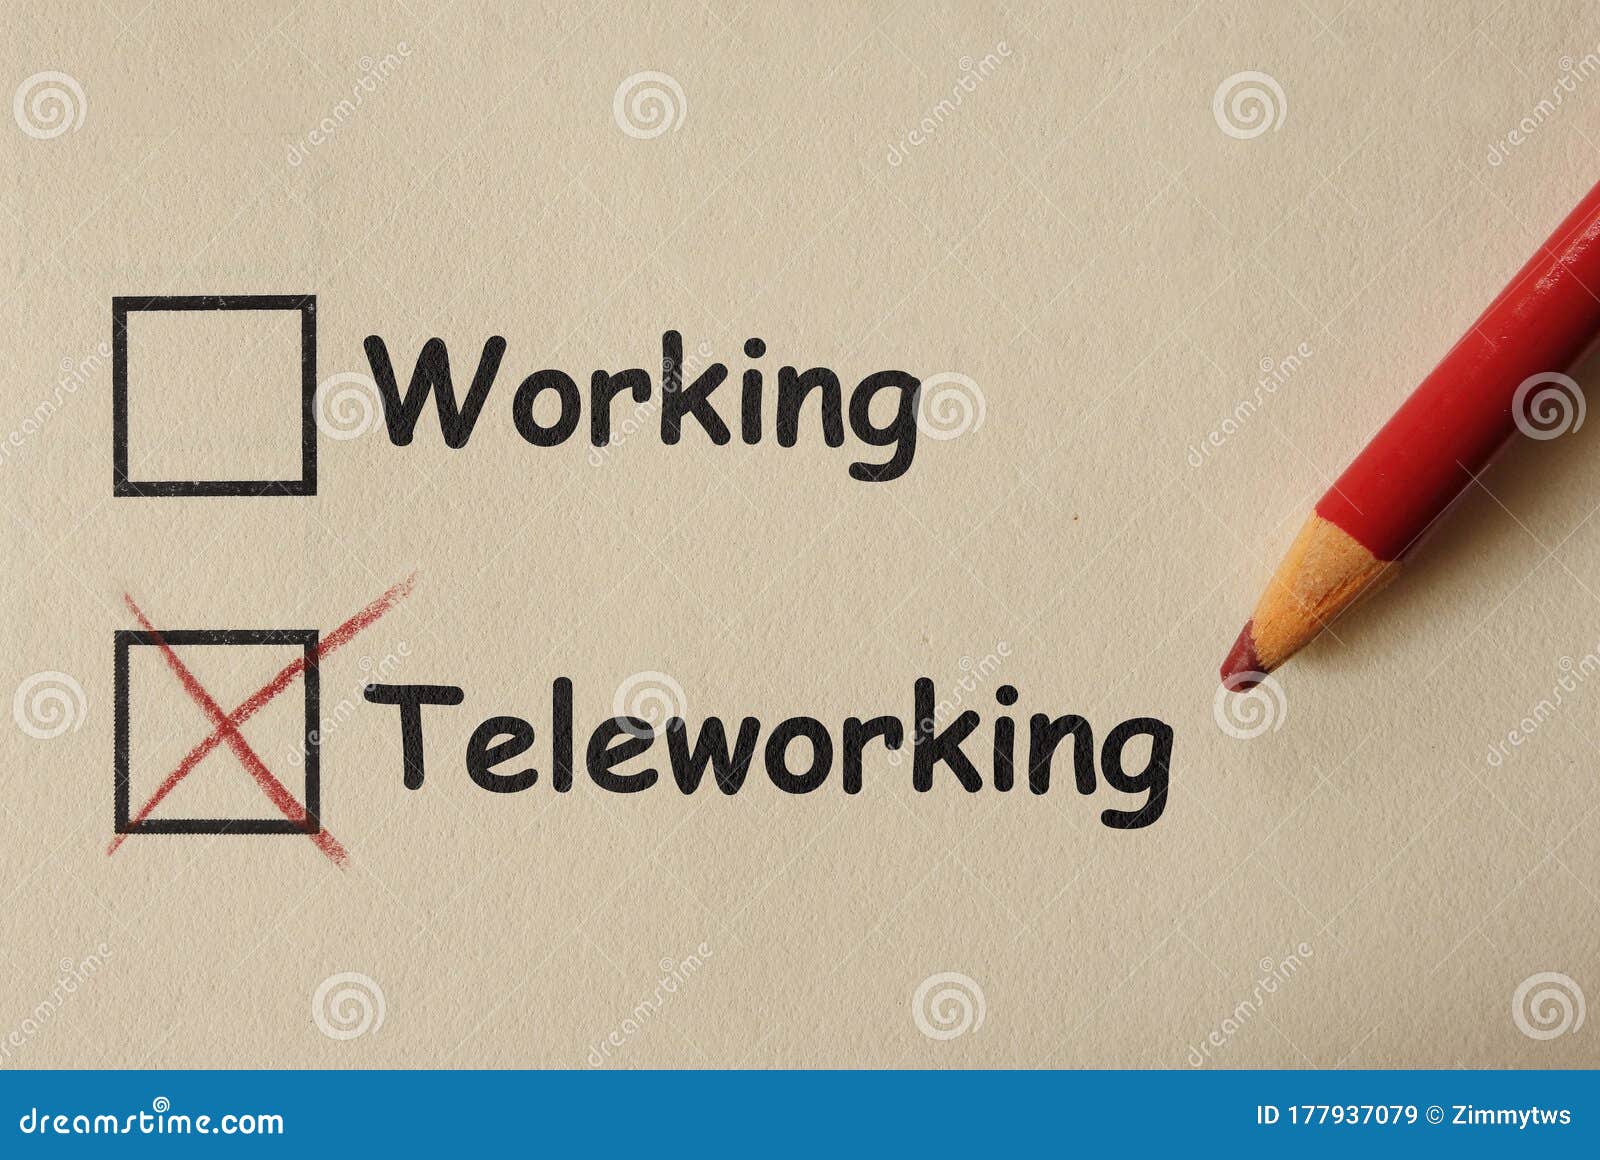 teleworking work from home concept